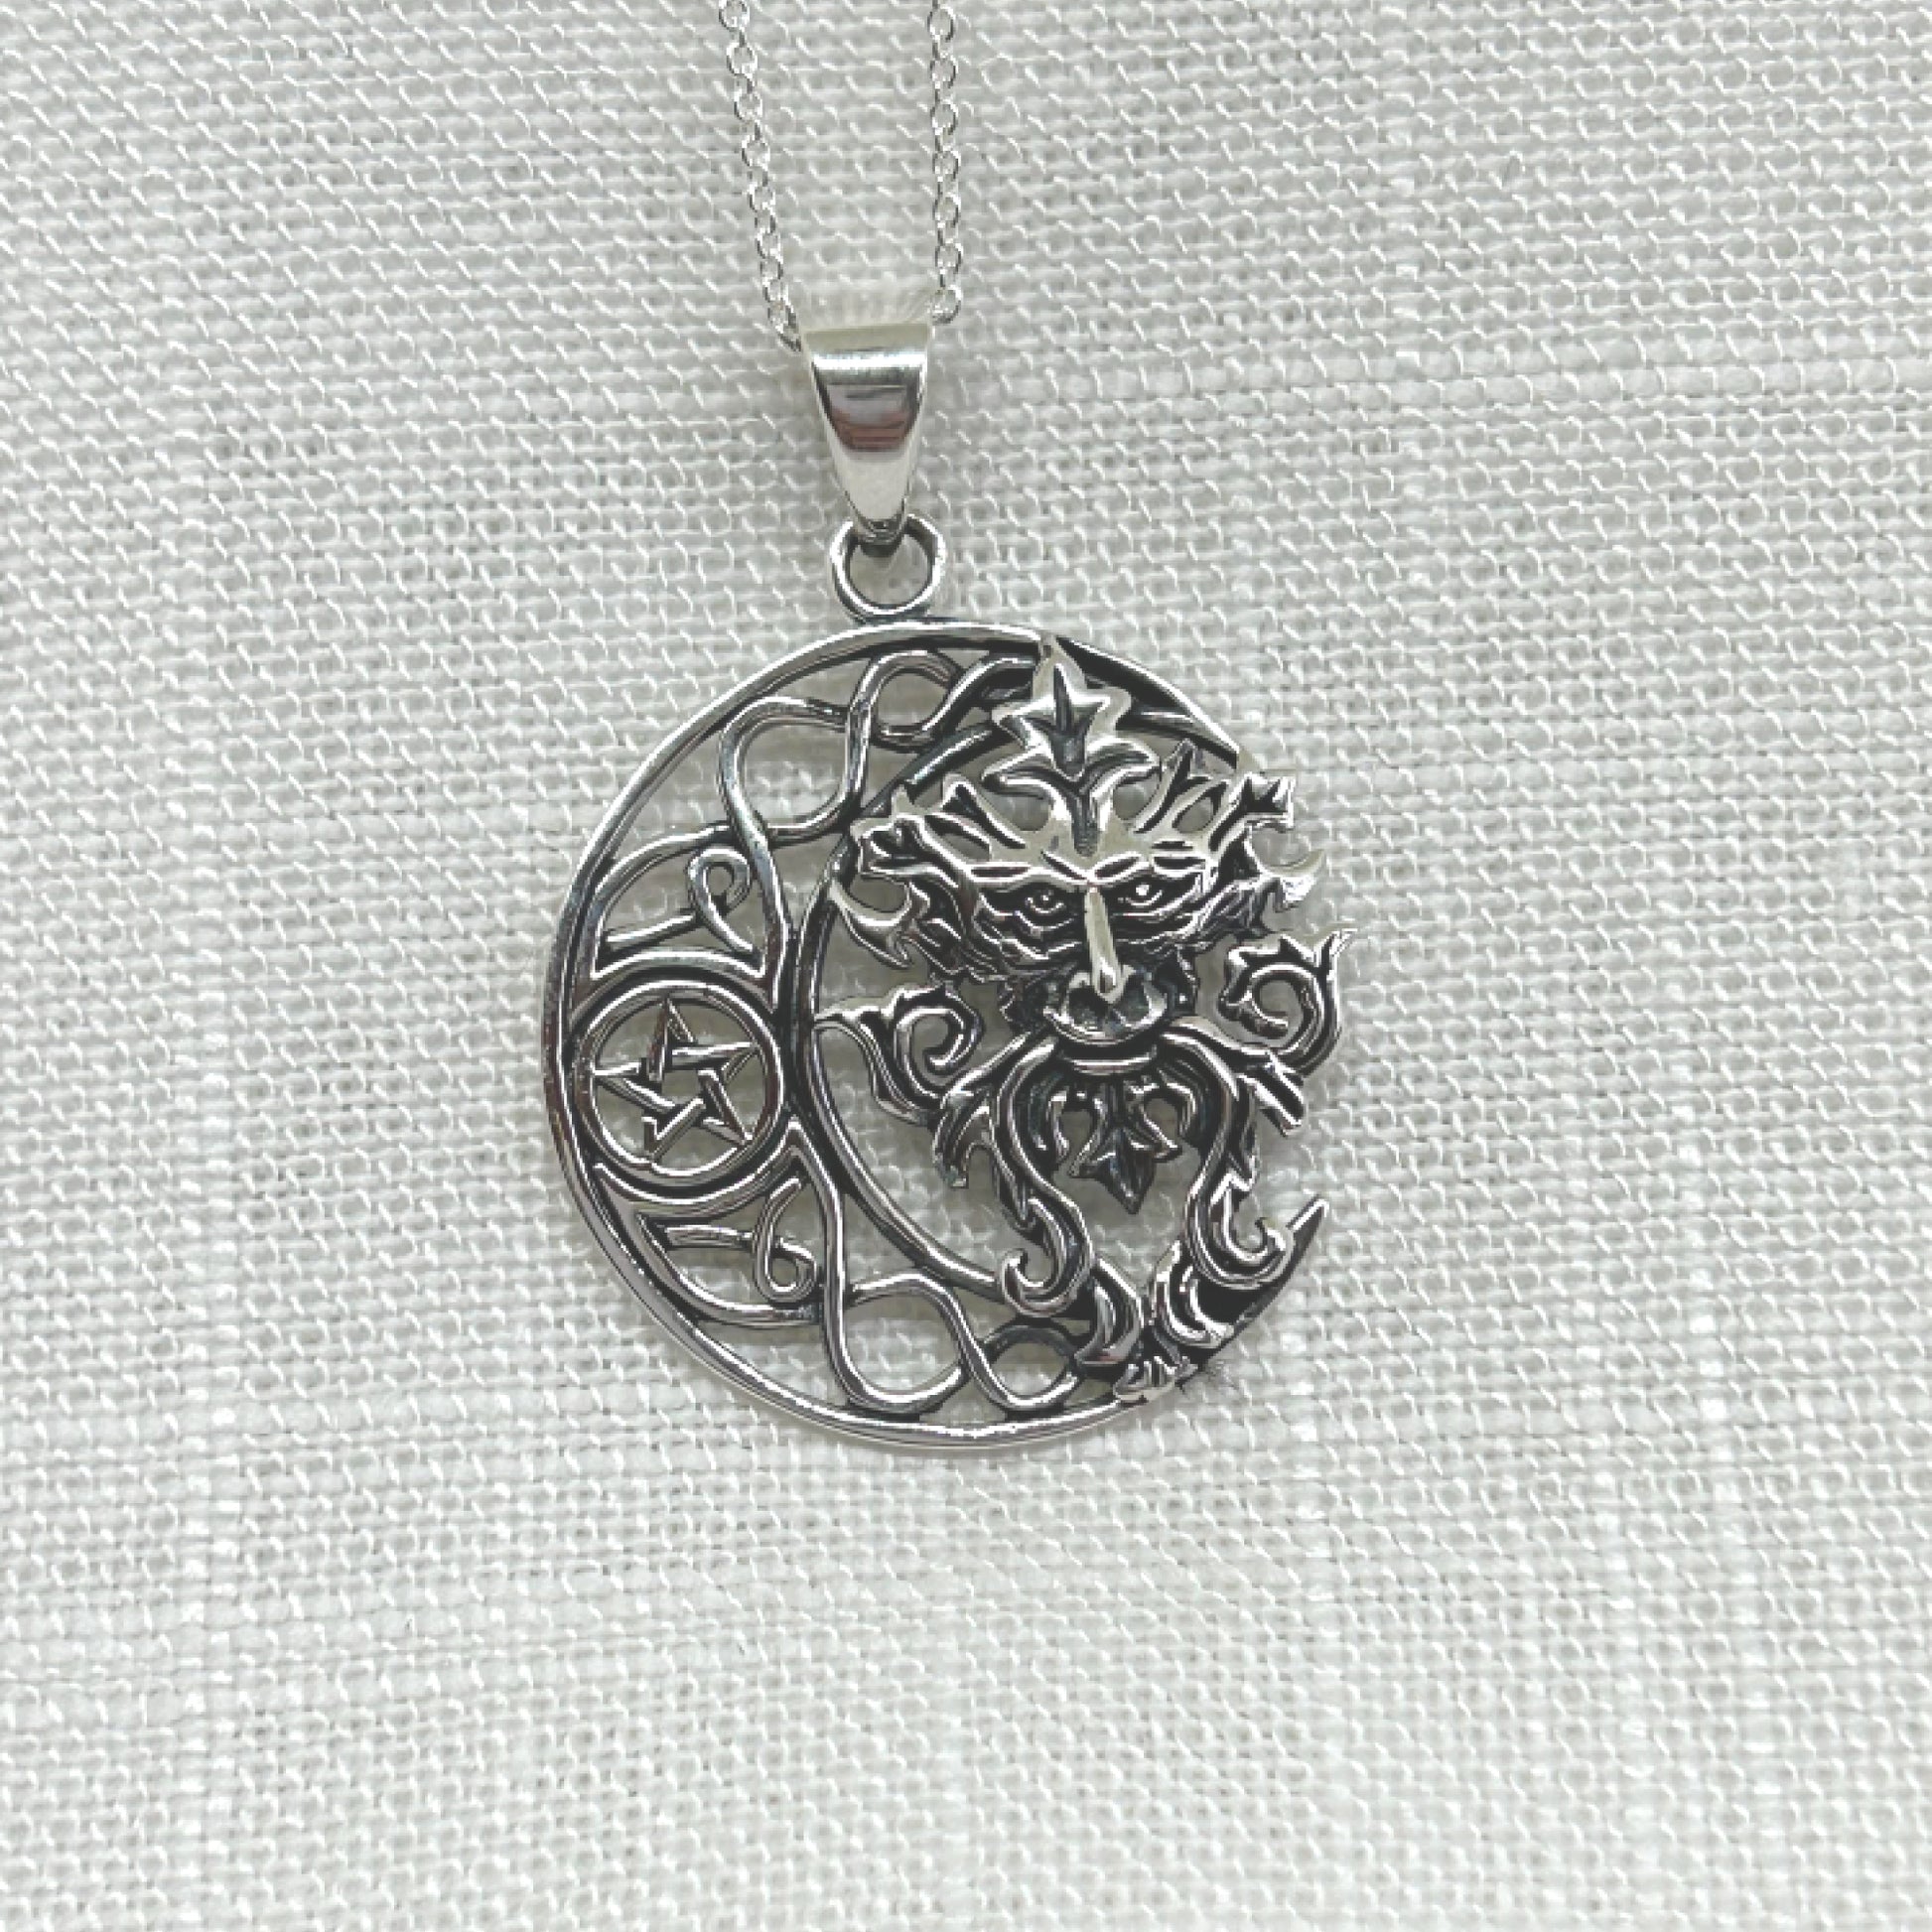 This 925 silver pendant features a Celtic knot style crescent moon with a pentacle within its centre. Filling the space in the moon is a gorgeous Green Man, the mysterious Pagan God who is a protector of all wildlife, woodlands and nature that dates back to medieval times. He is also known by many other names such as Jack o' the Green, Cernunnos, John Barleycorn and Herne of the Hunt. The pendant is approximately 3.6cm long including the bale by 2.6cm wide. Total weight is 7g.